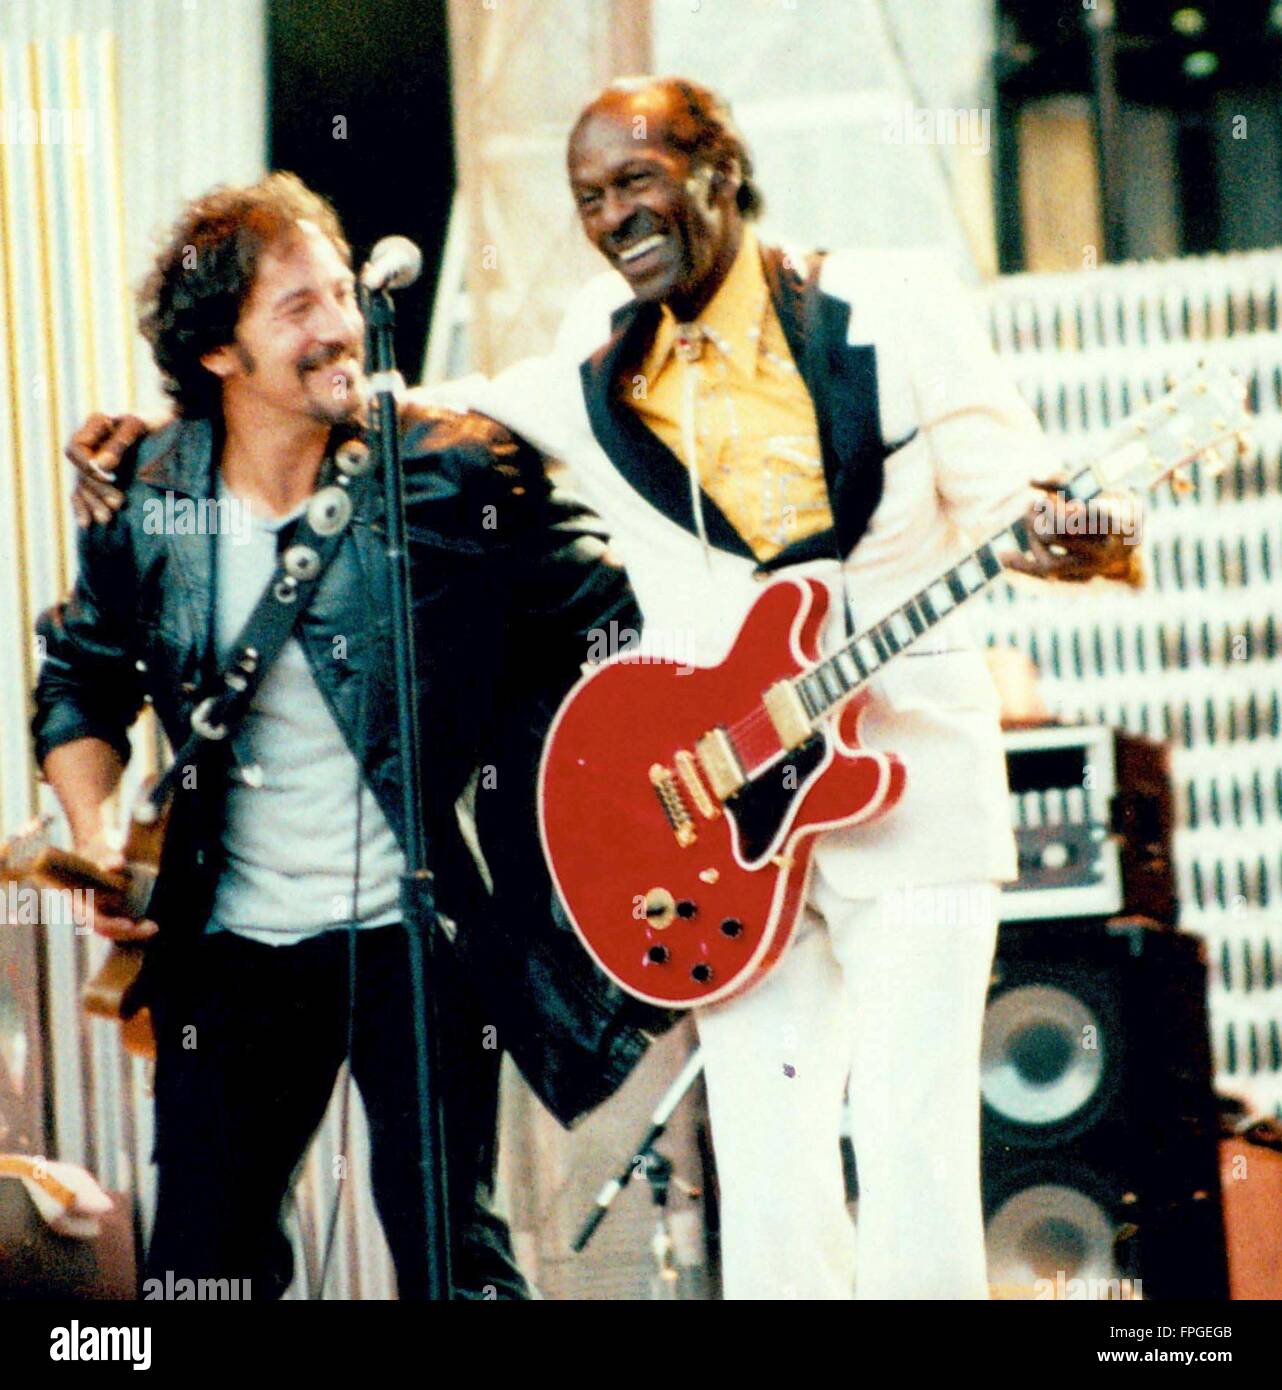 BRUCE SPRINGSTEEN, Chuck Berry POUR CONCERT HALL OF FAME, CLEVELAND 09-02-1995 photo Michael Brito Banque D'Images